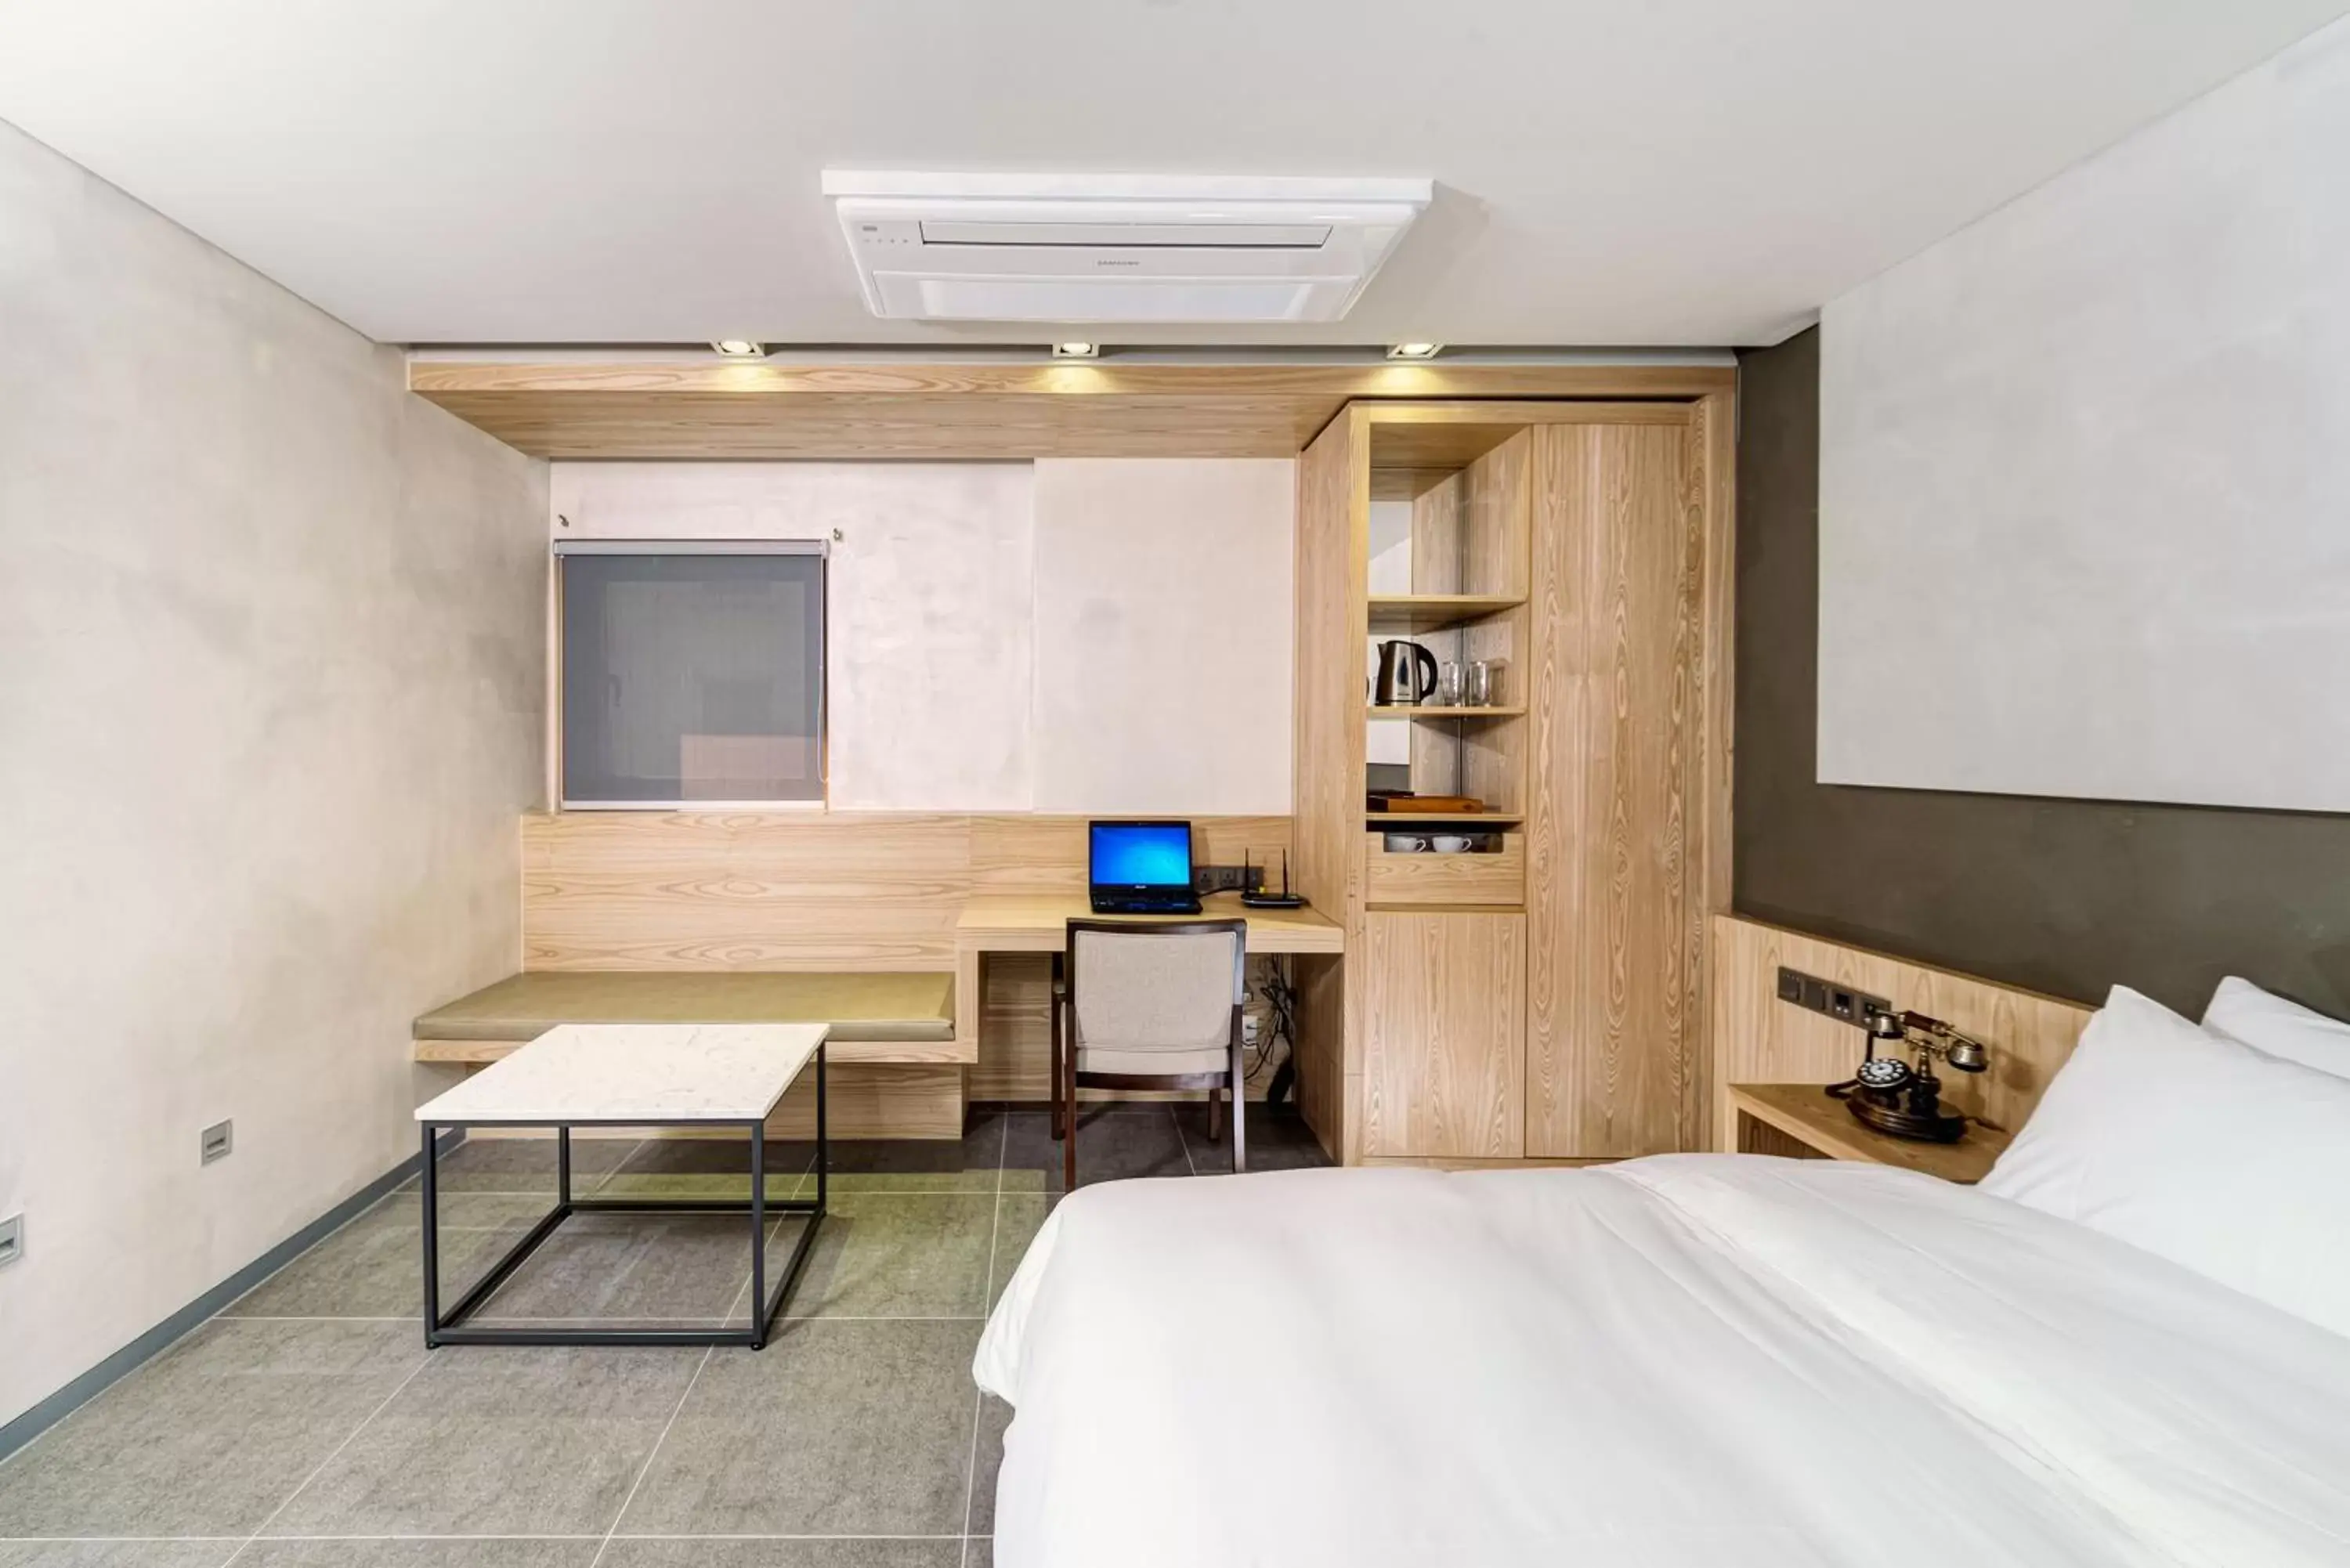 Area and facilities in Capace Hotel Gangnam